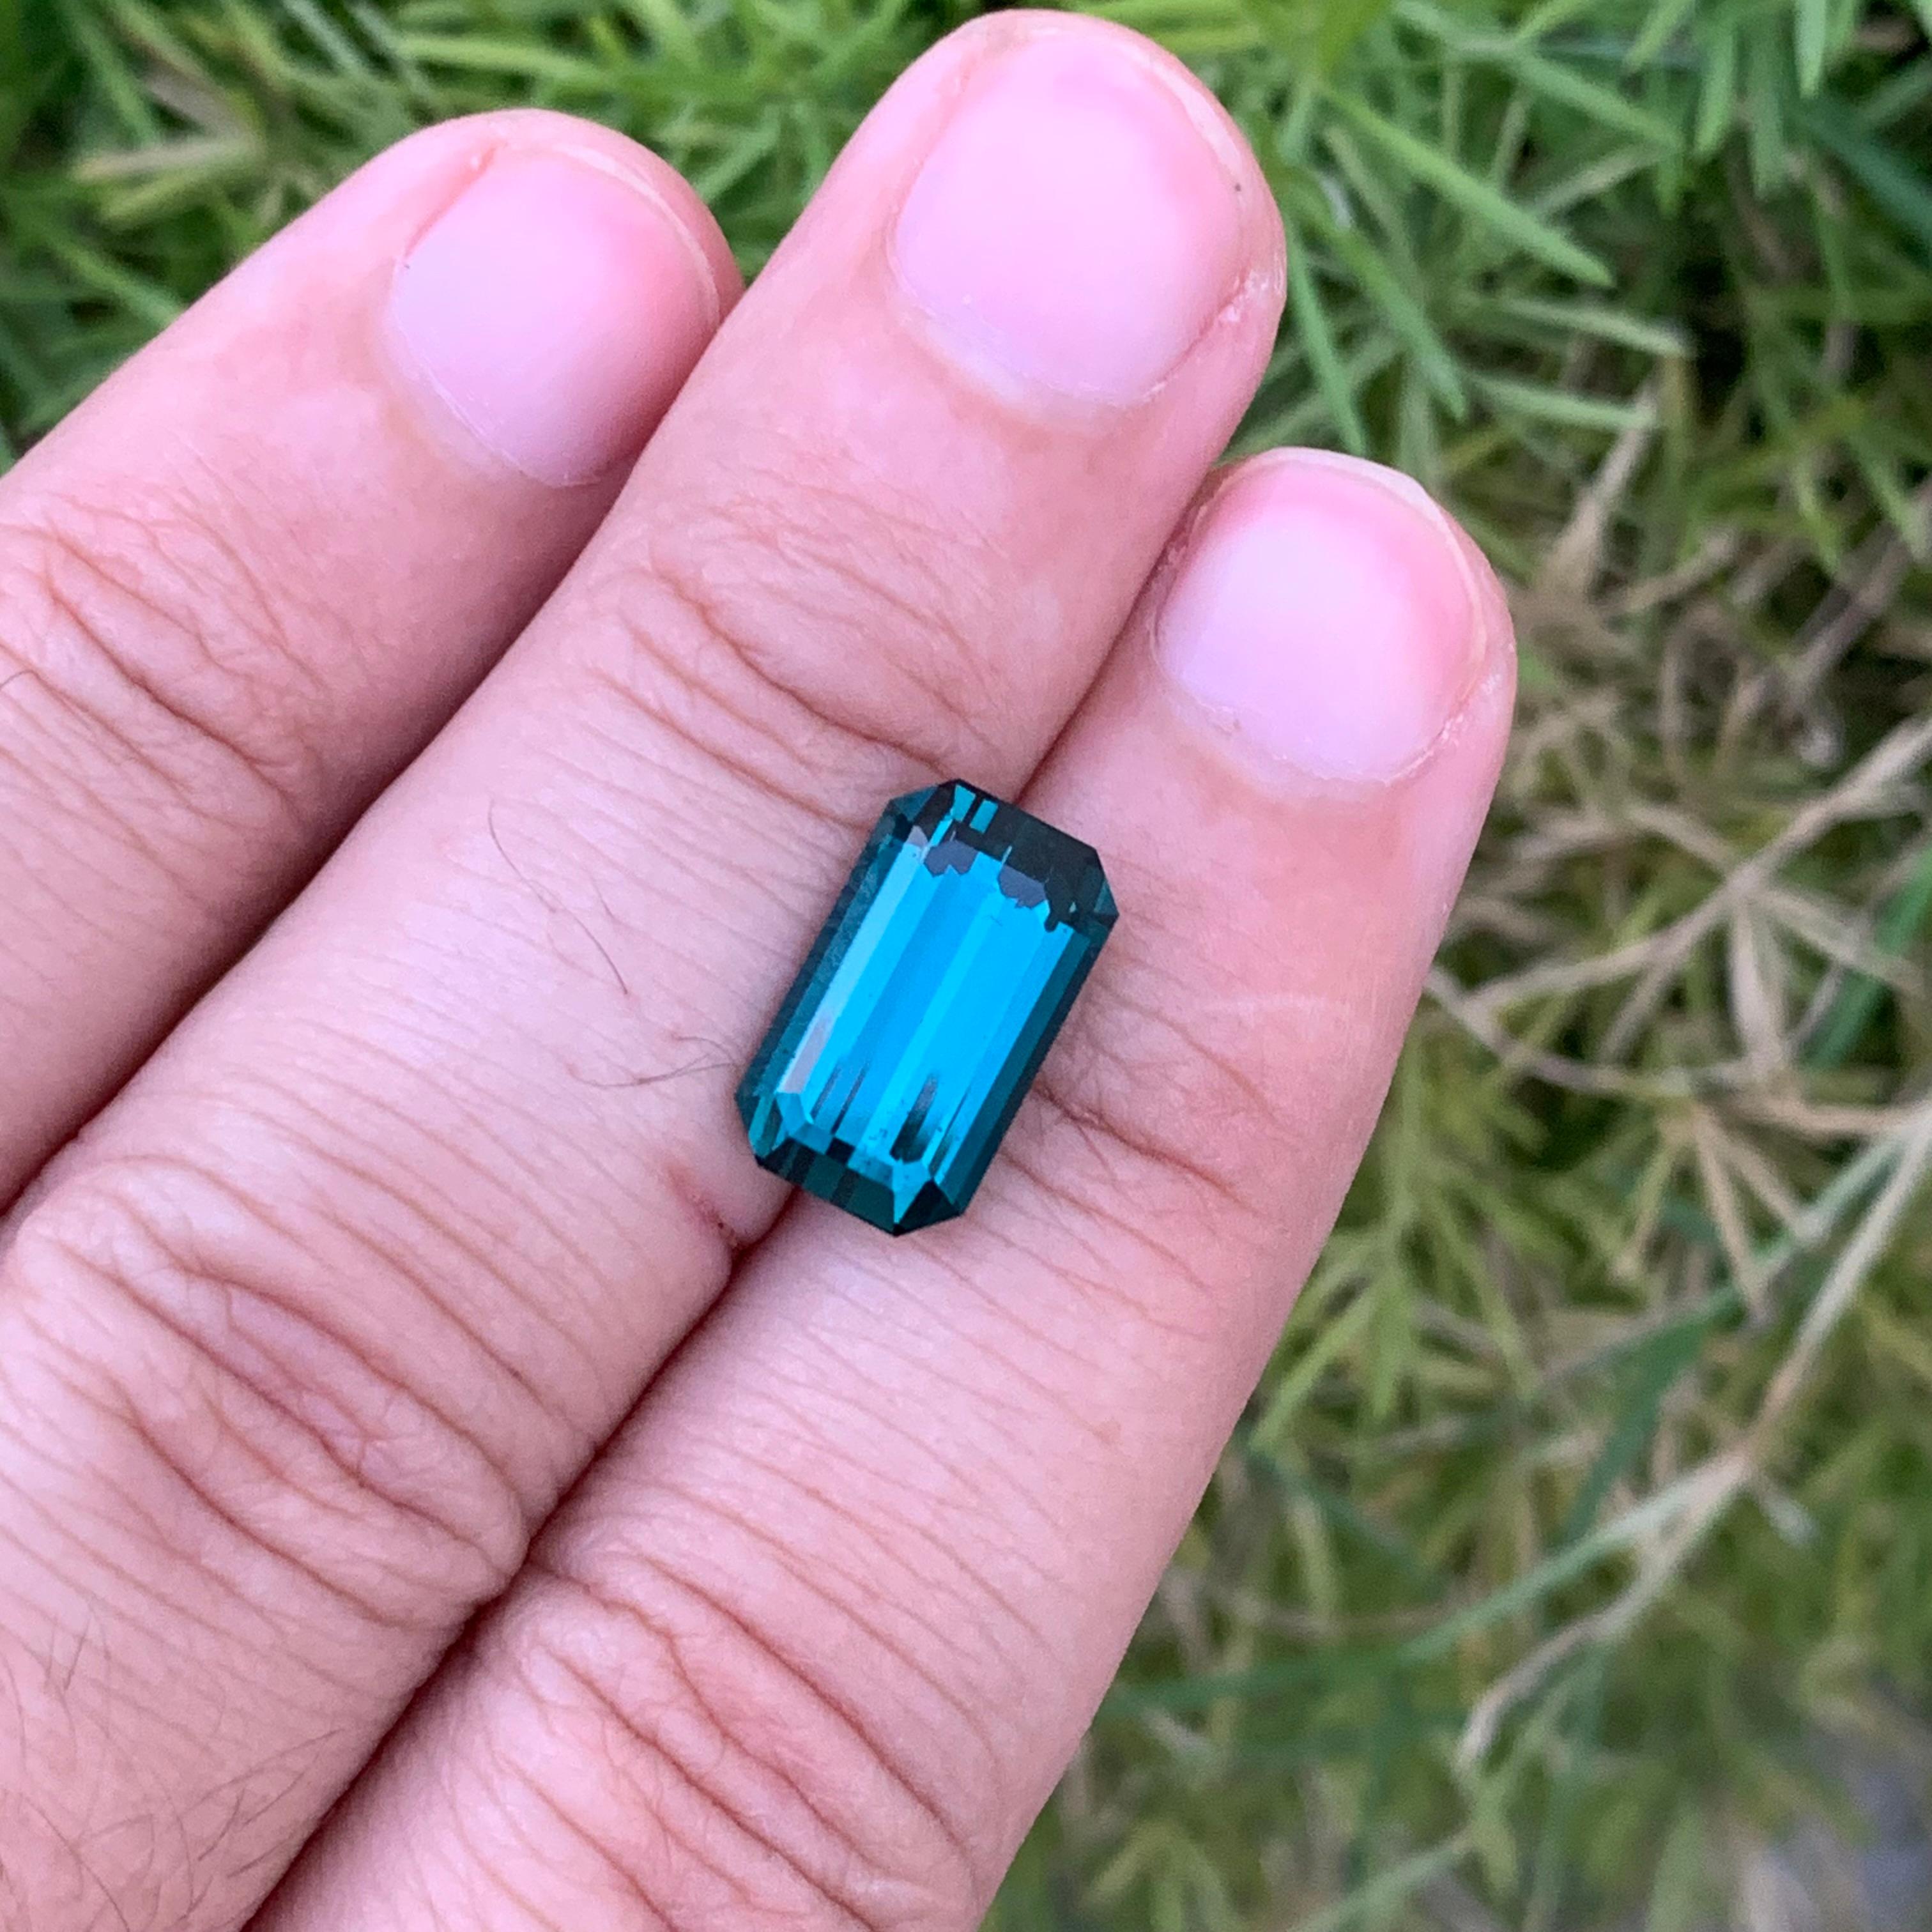 Top AAA Quality 6.00 Carat Natural Loose Indicolite Tourmaline Emerald Shape Gem For Sale 4